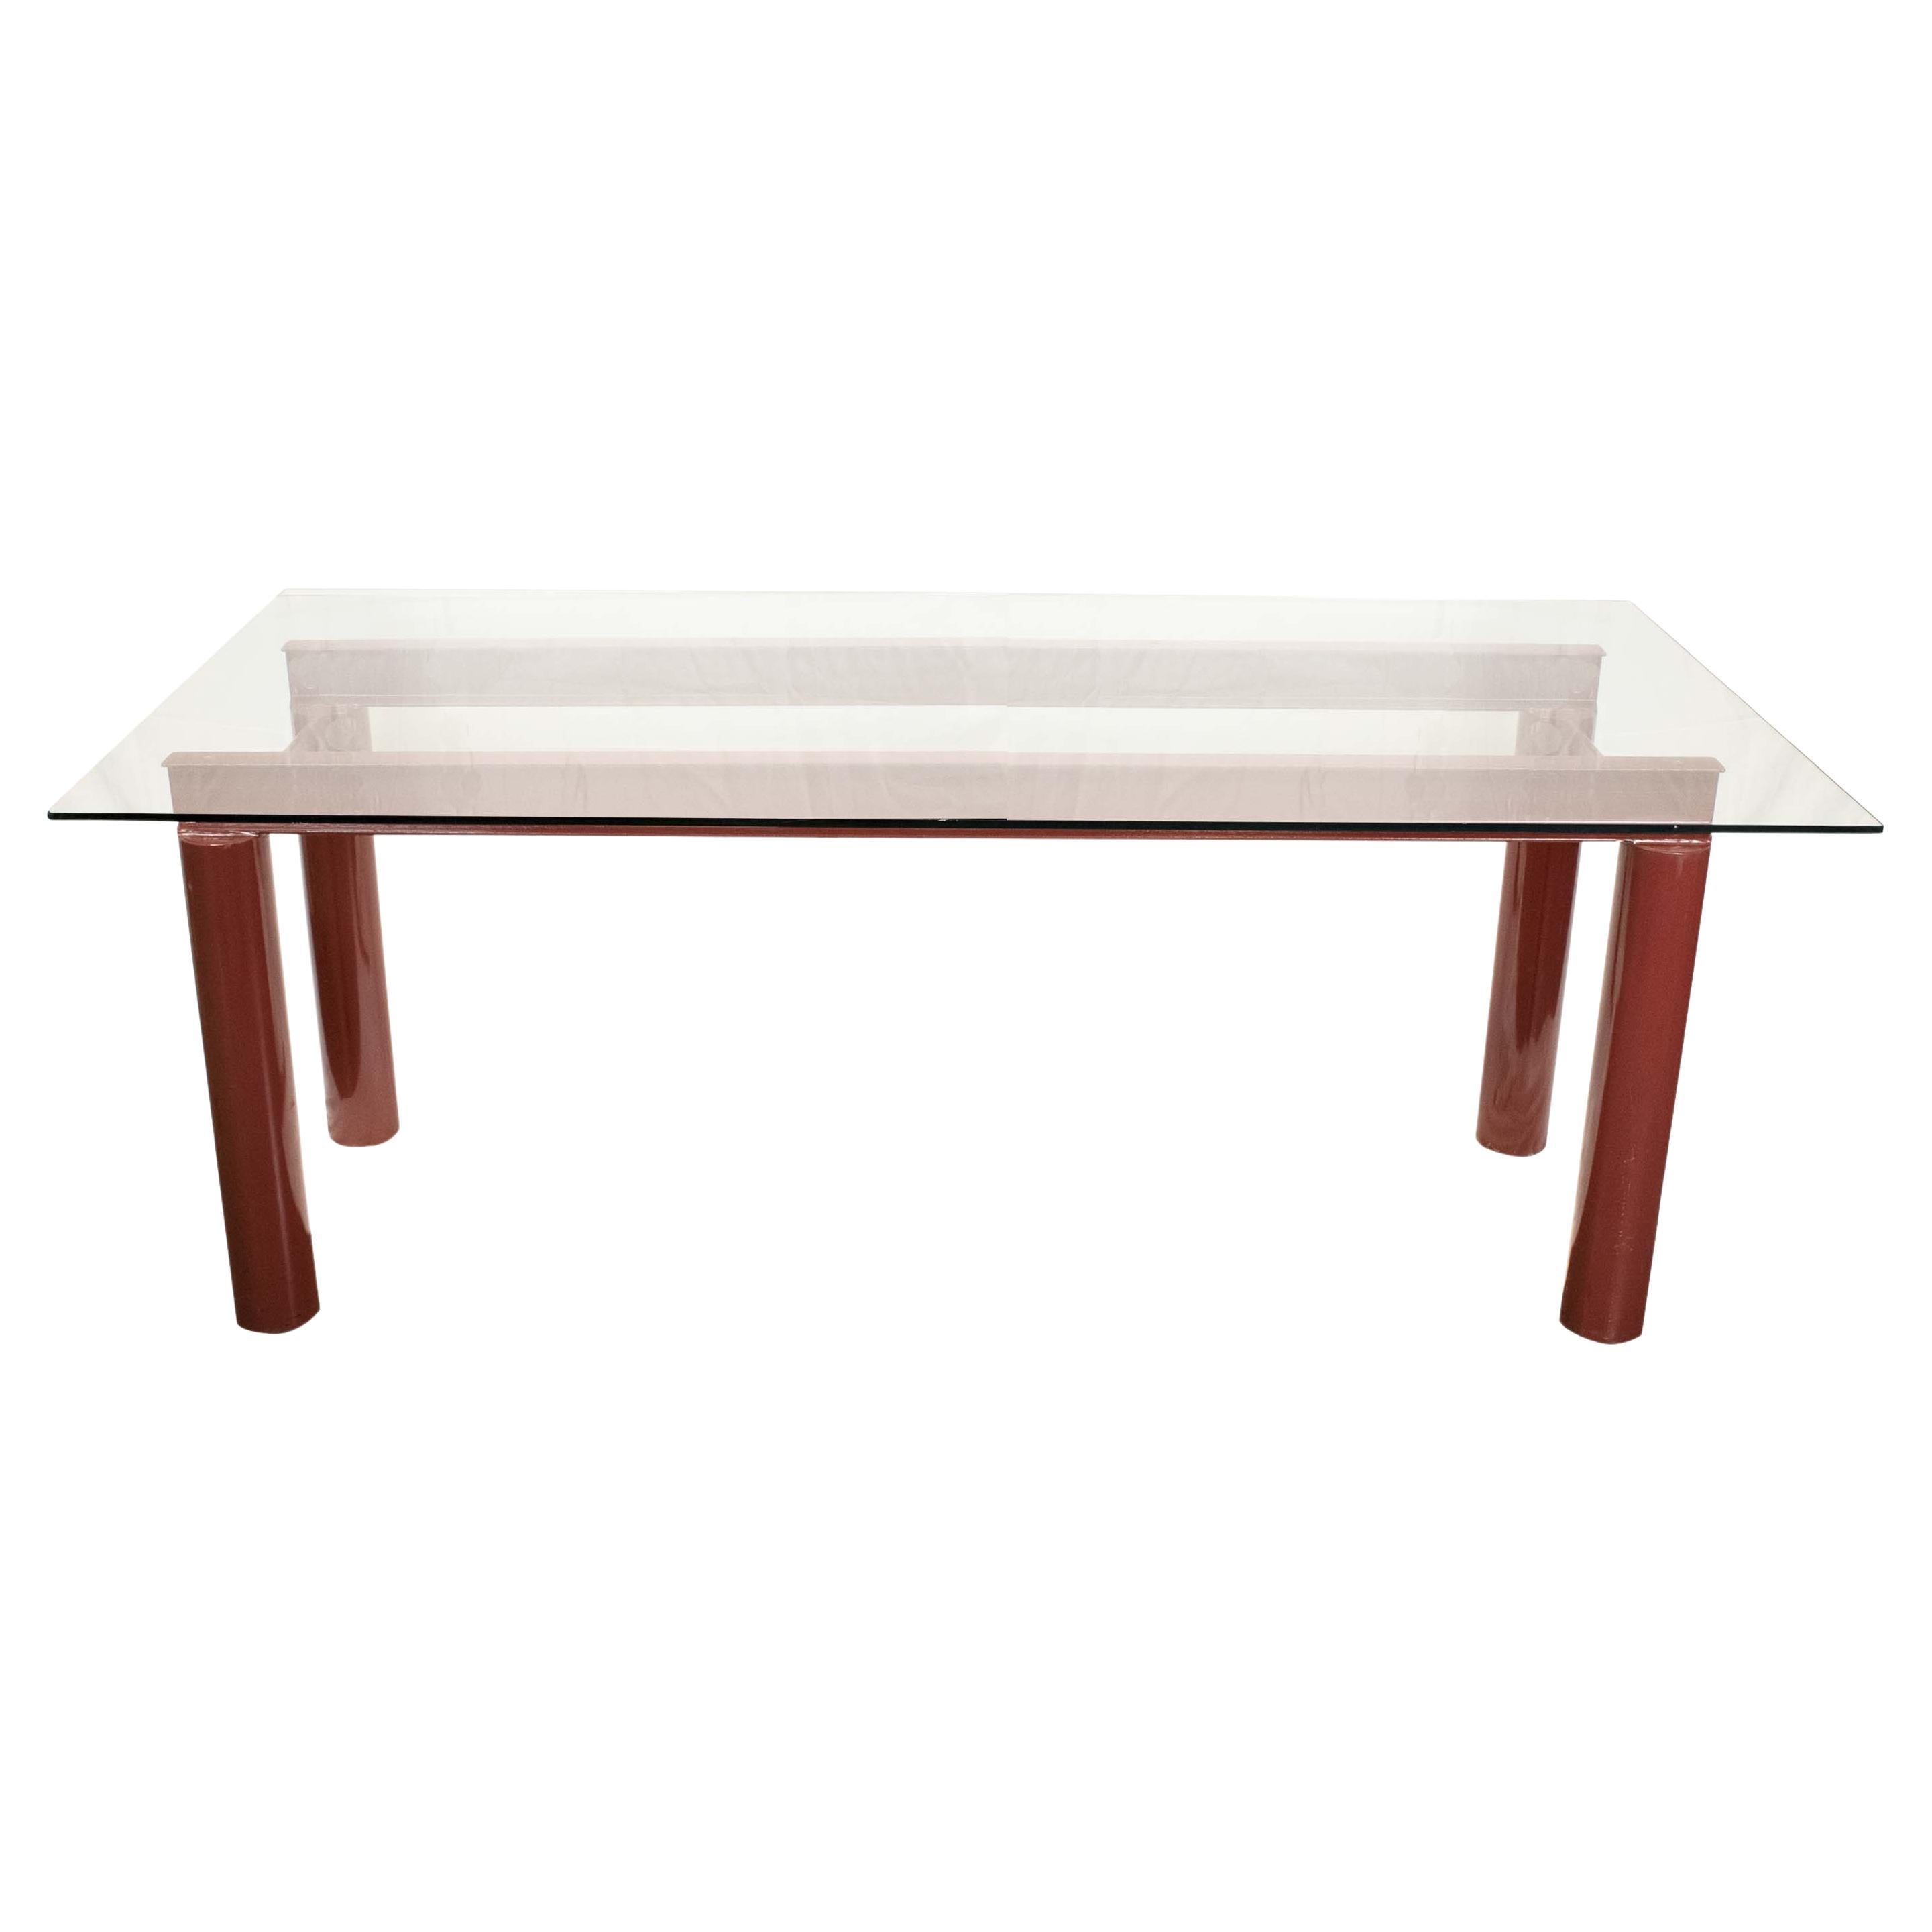 Modern Bourdeaux Steel Dining Table with Glass Top 187 x 89 cm, Italia, 1970